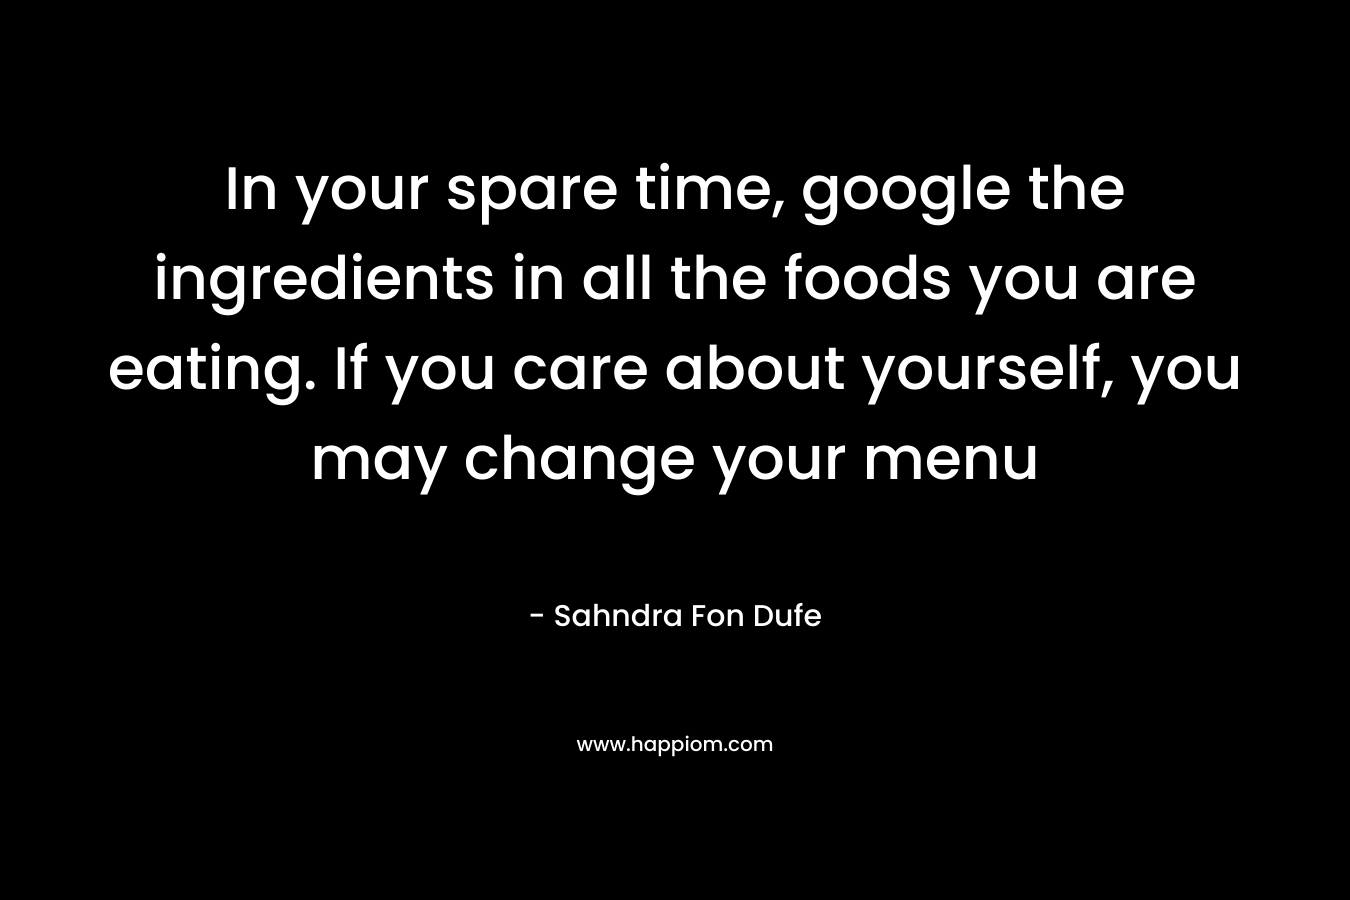 In your spare time, google the ingredients in all the foods you are eating. If you care about yourself, you may change your menu – Sahndra Fon Dufe